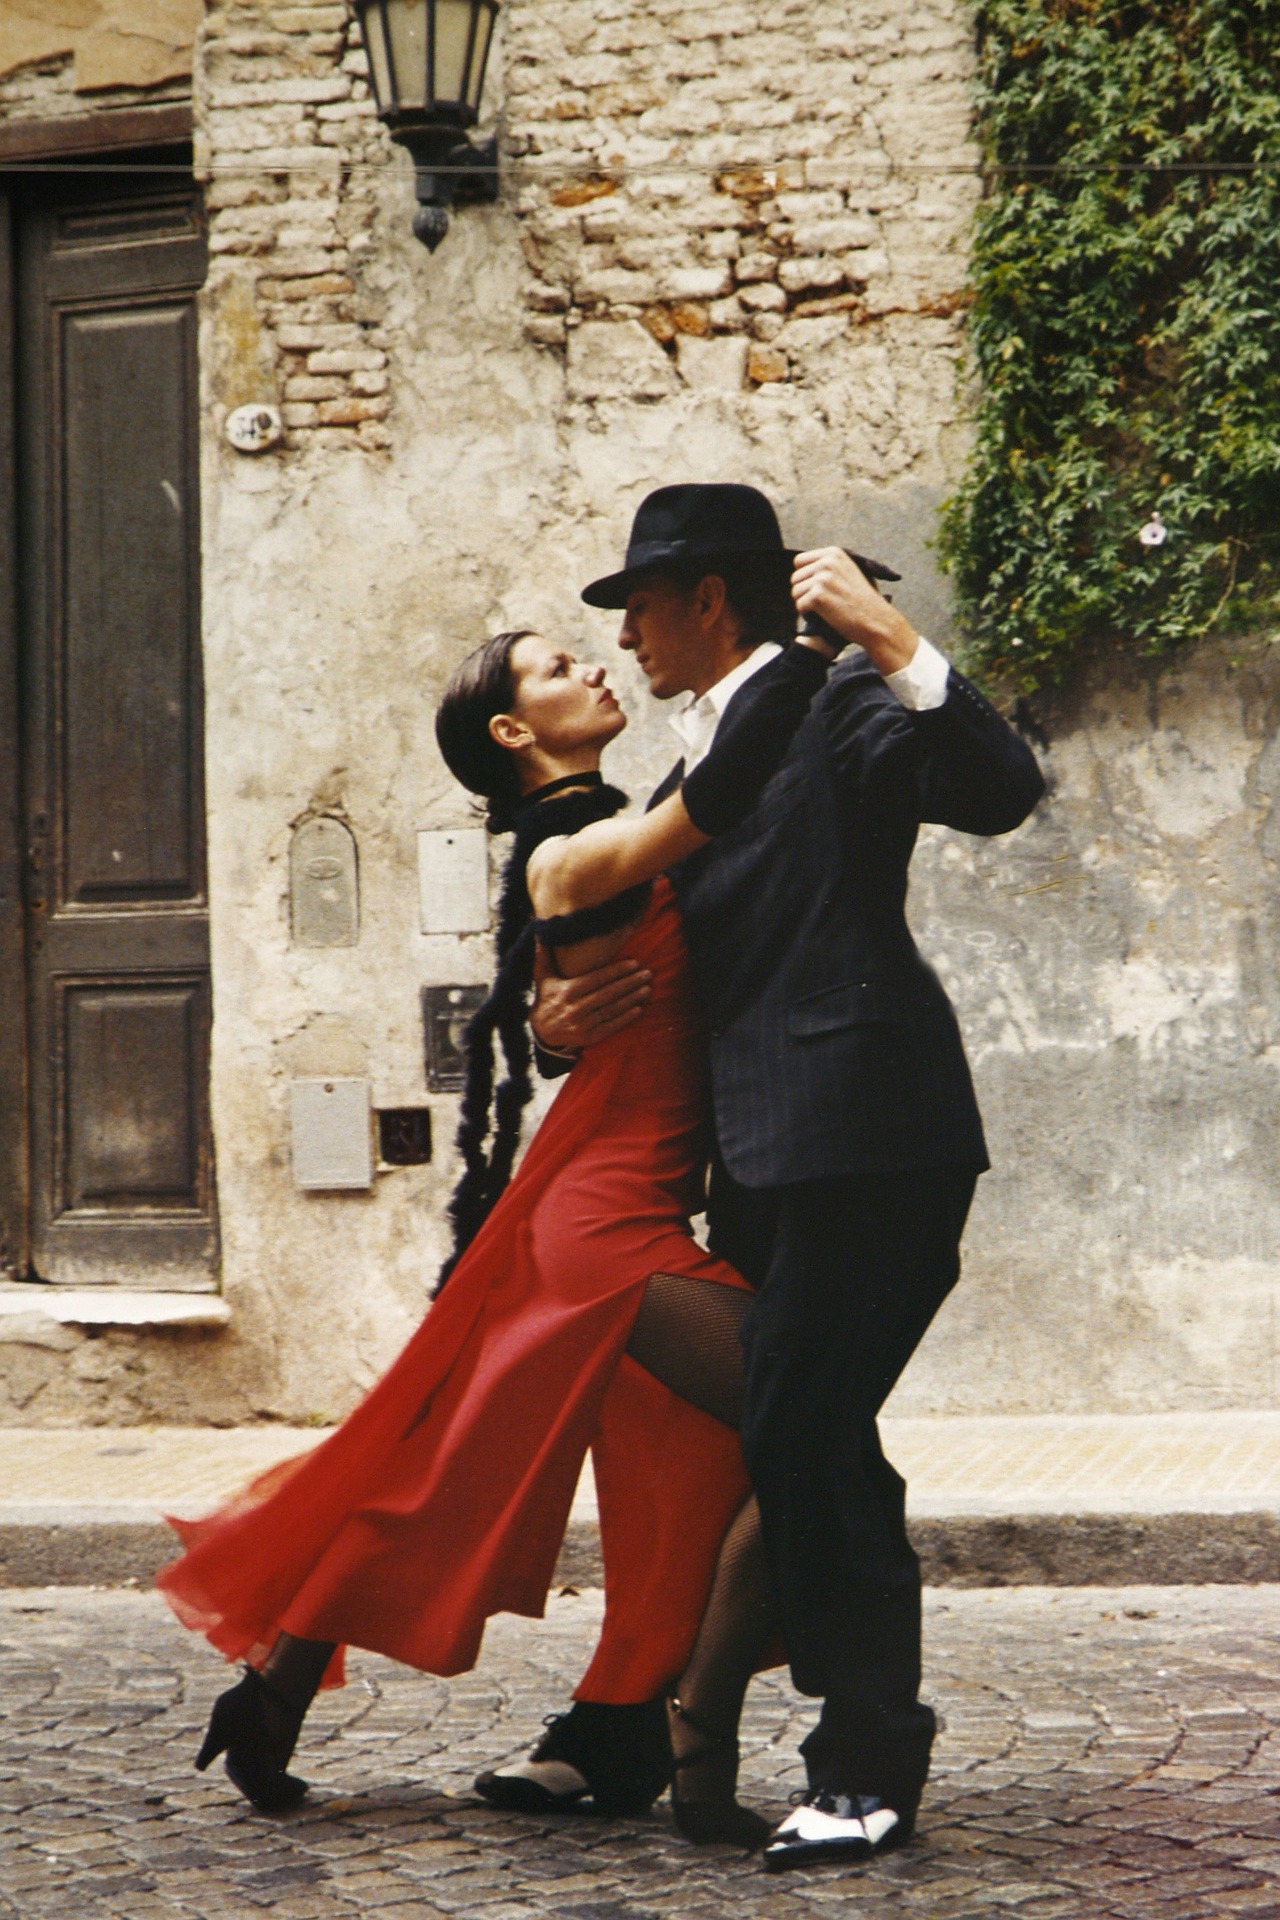 See the birthplace of Tango